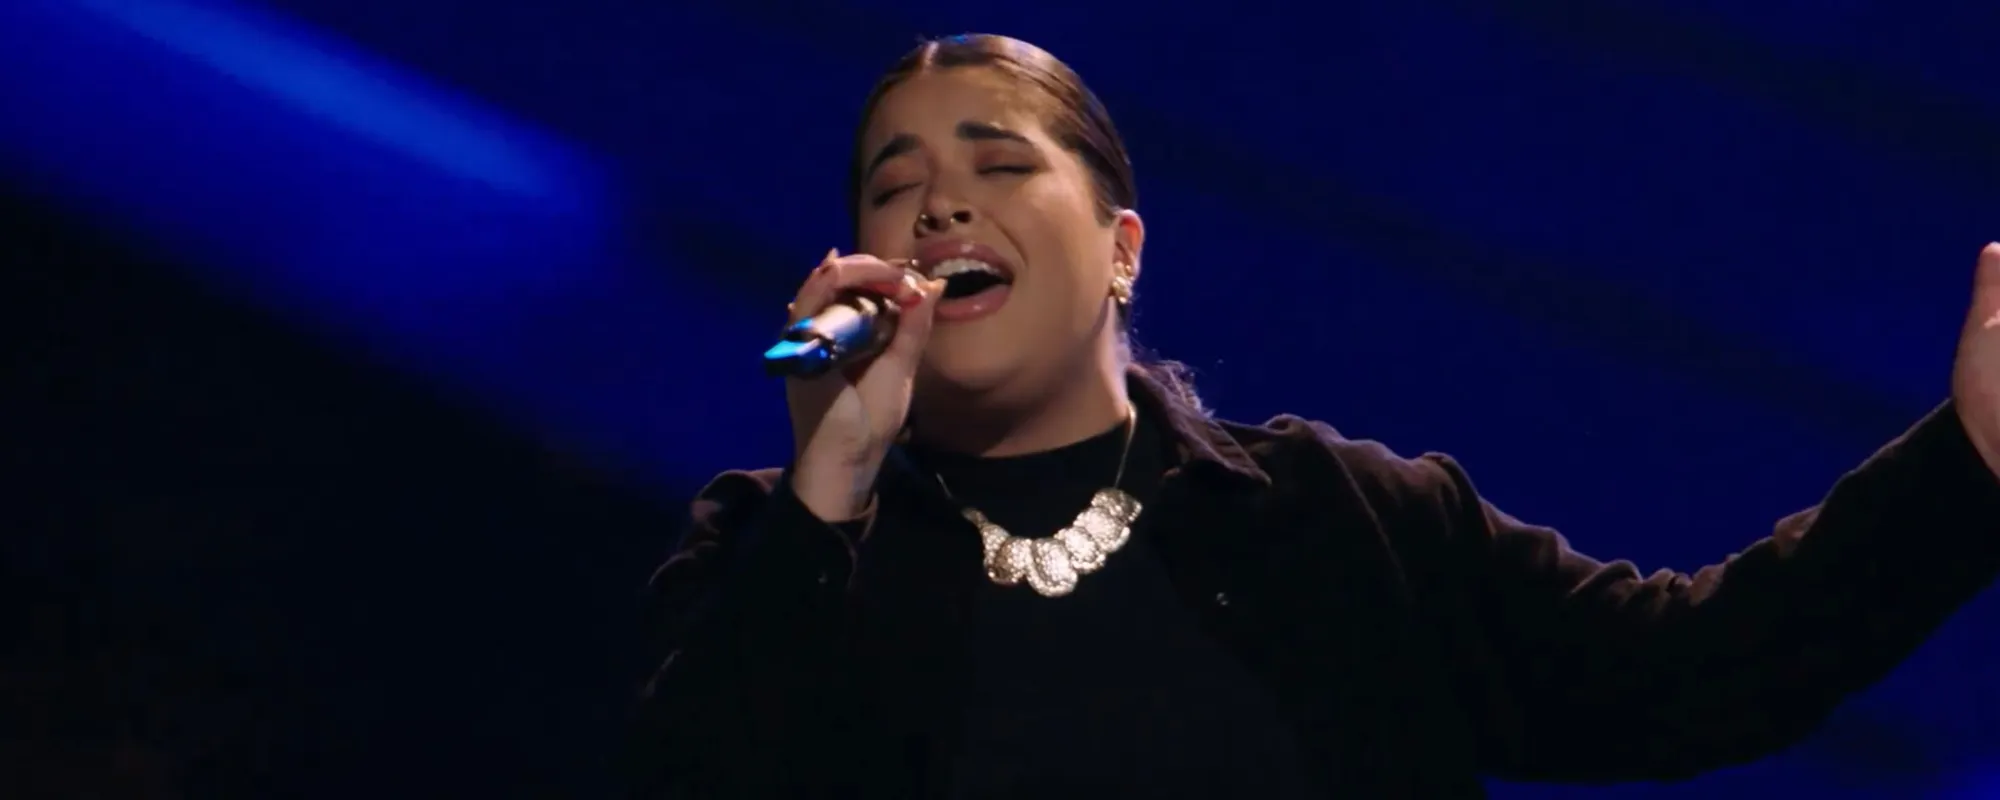 Mafe’s Enchanting “Bésame Mucho” Rendition Incites Instant 4-Chair Turn From ‘The Voice’ Coaches